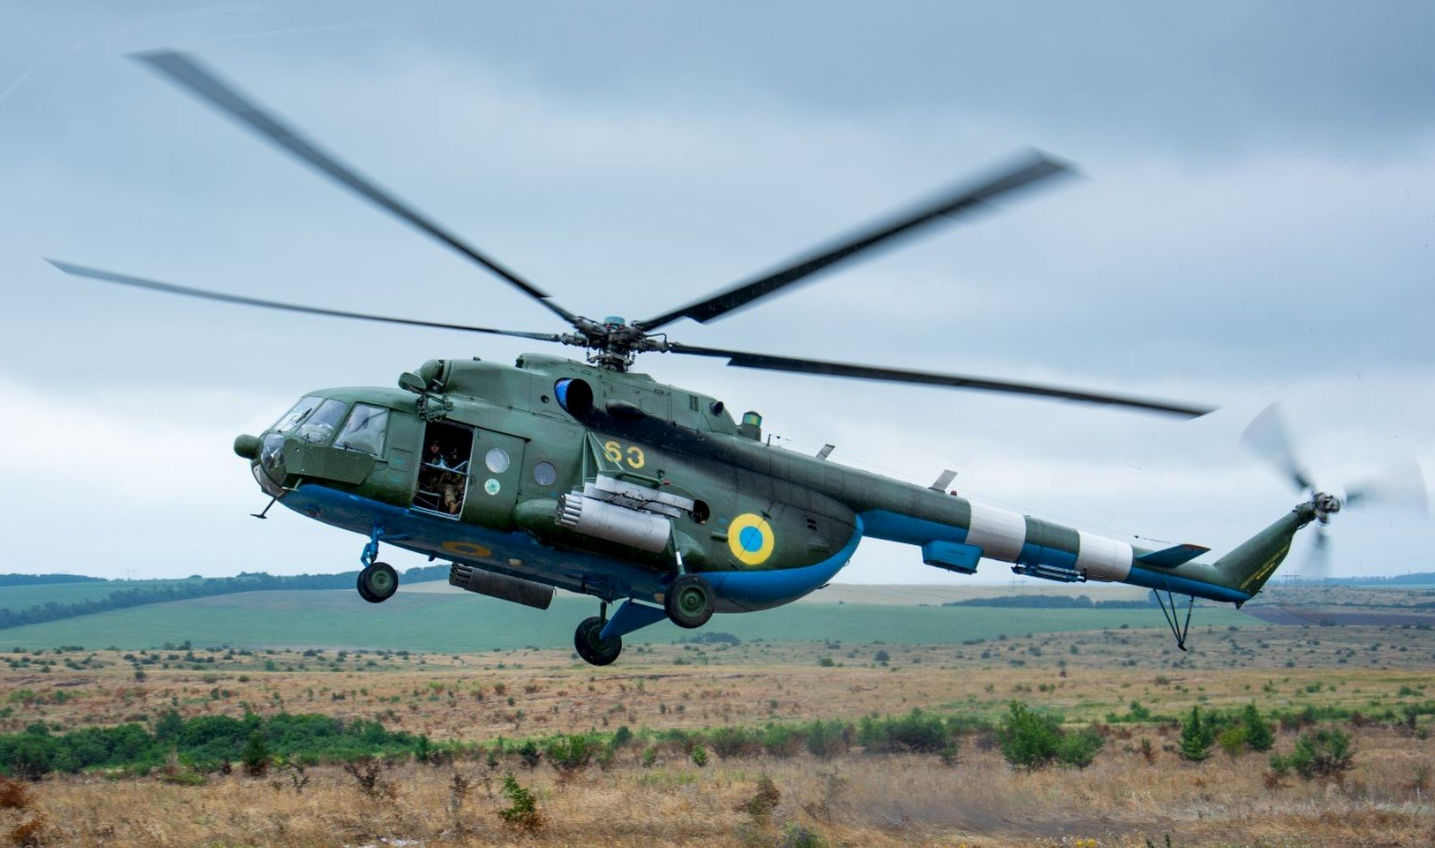 Ukrainian Mi-8/17 Hip-type helicopter equipped with Russian-designed rocket pods. (Public Domain)